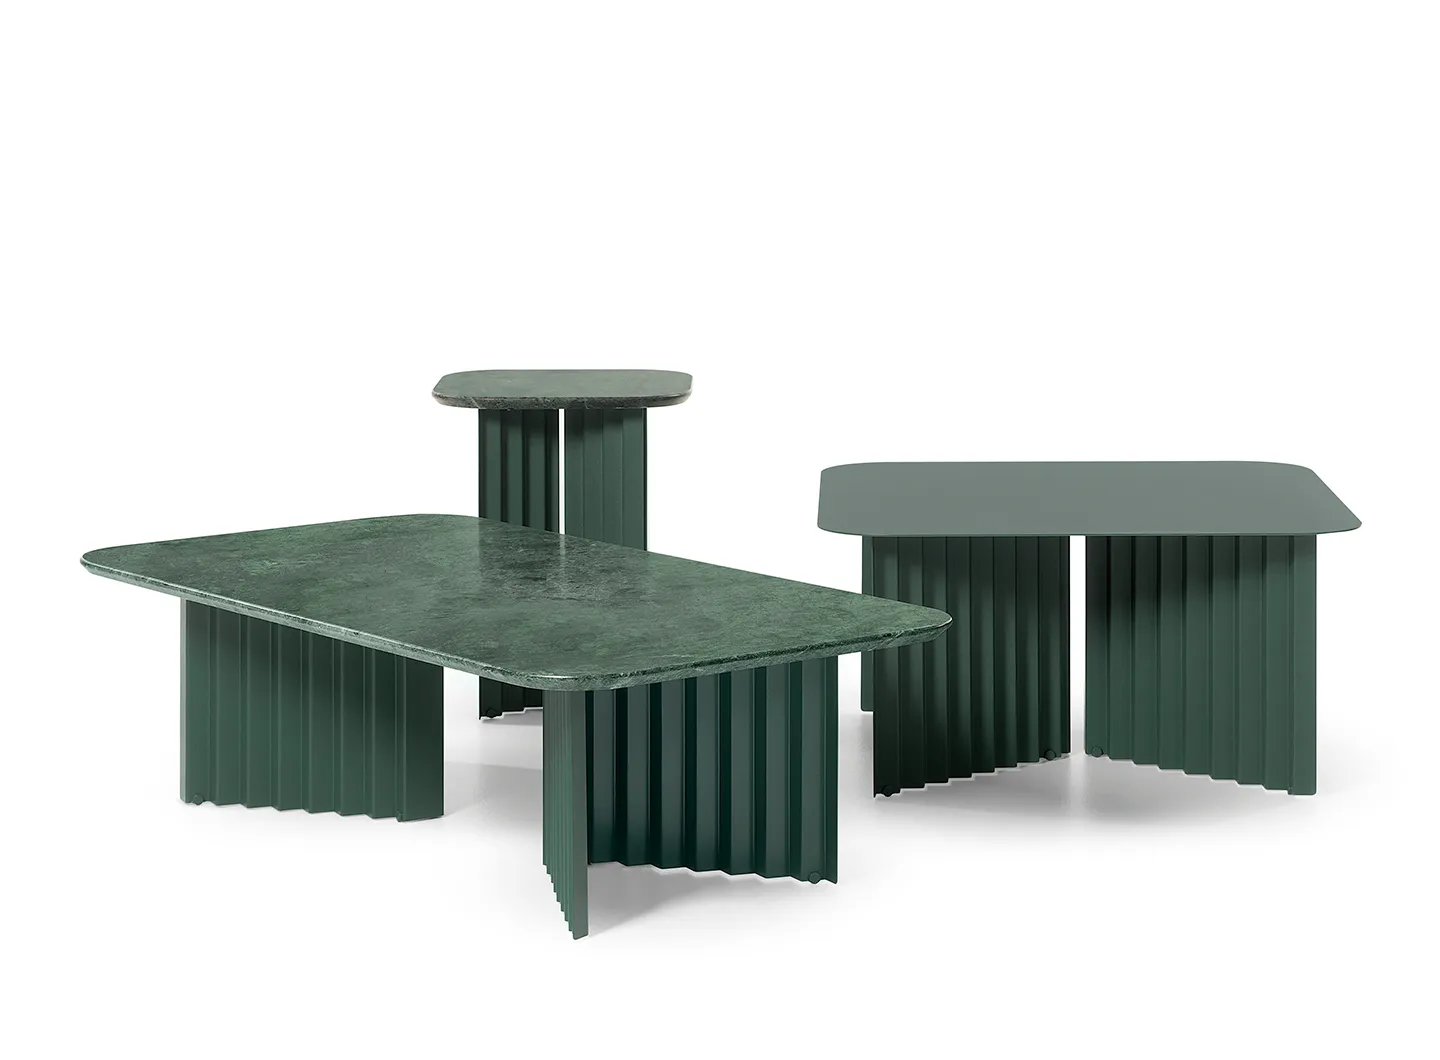 RS Barcelona Plec table collection for indoor and outdoor use